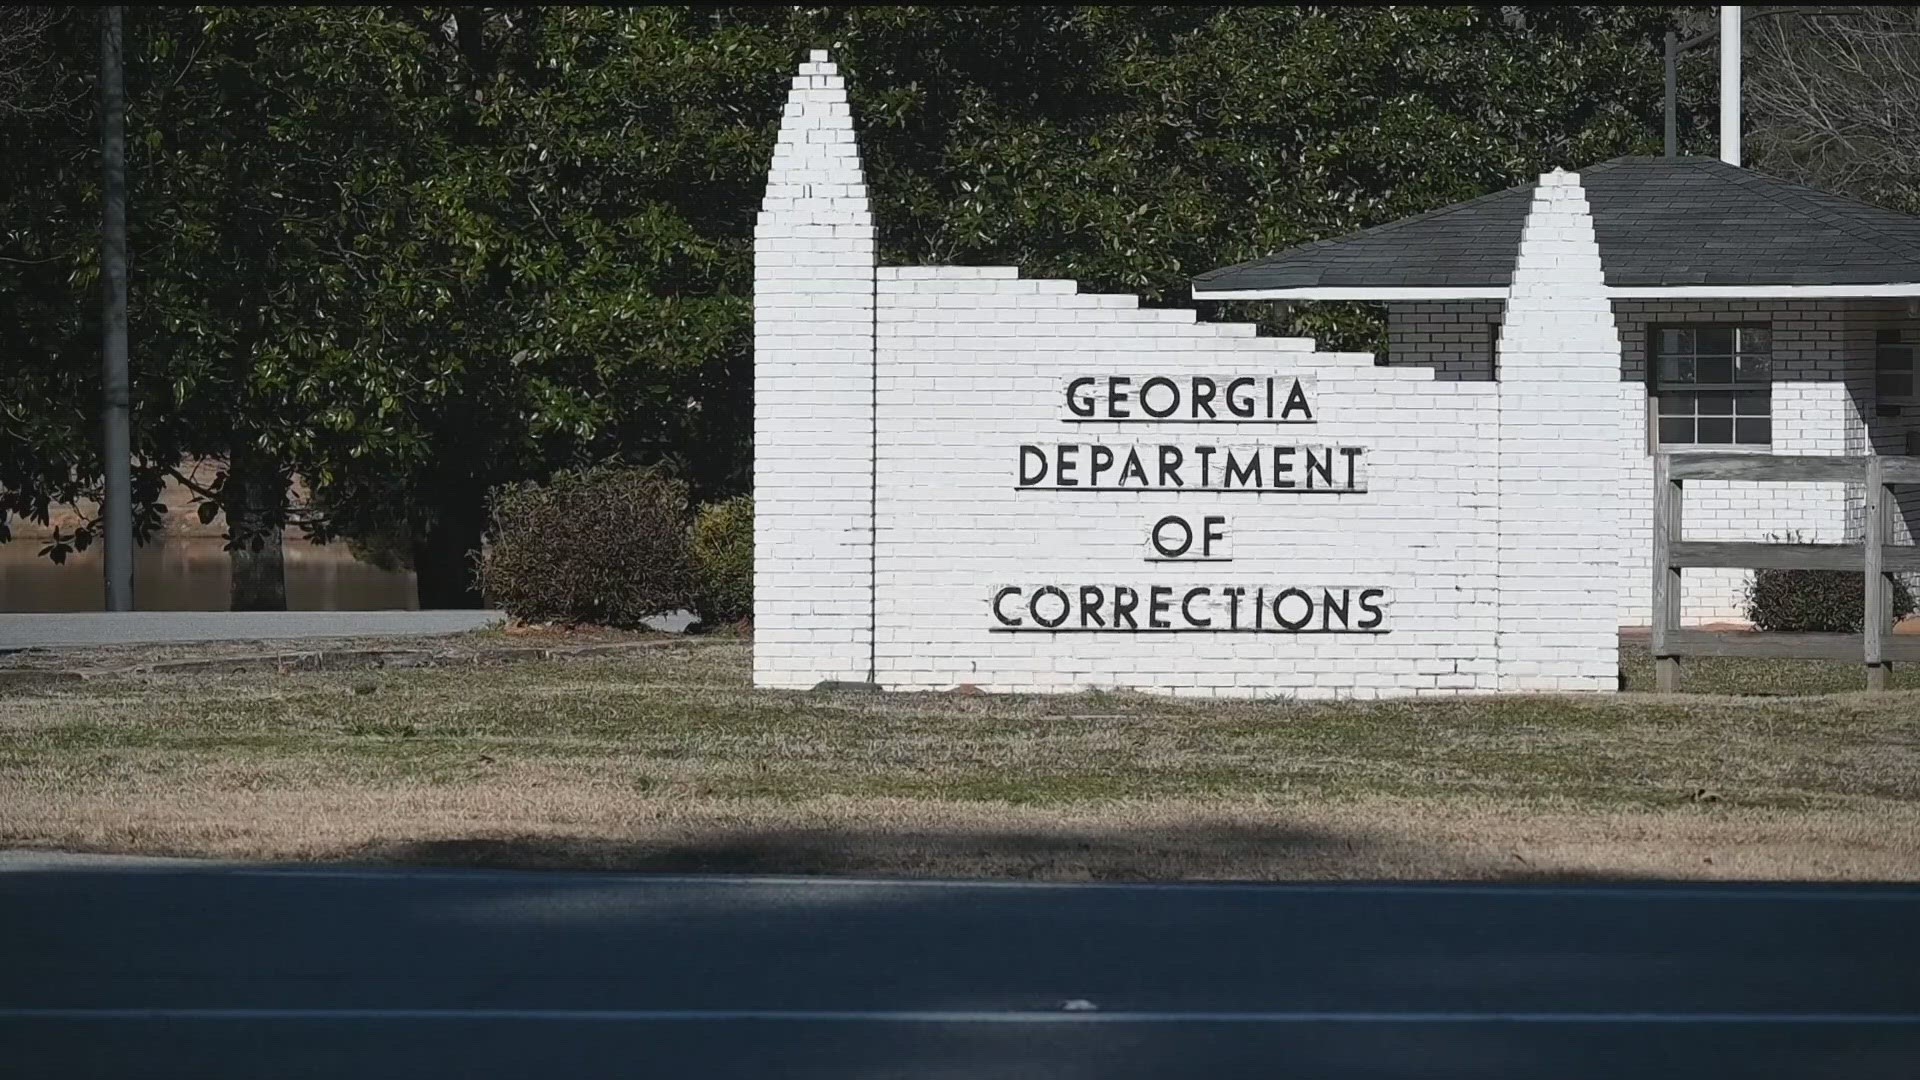 Even one of Georgia’s most secure prison facilities is not immune to the system's problems.